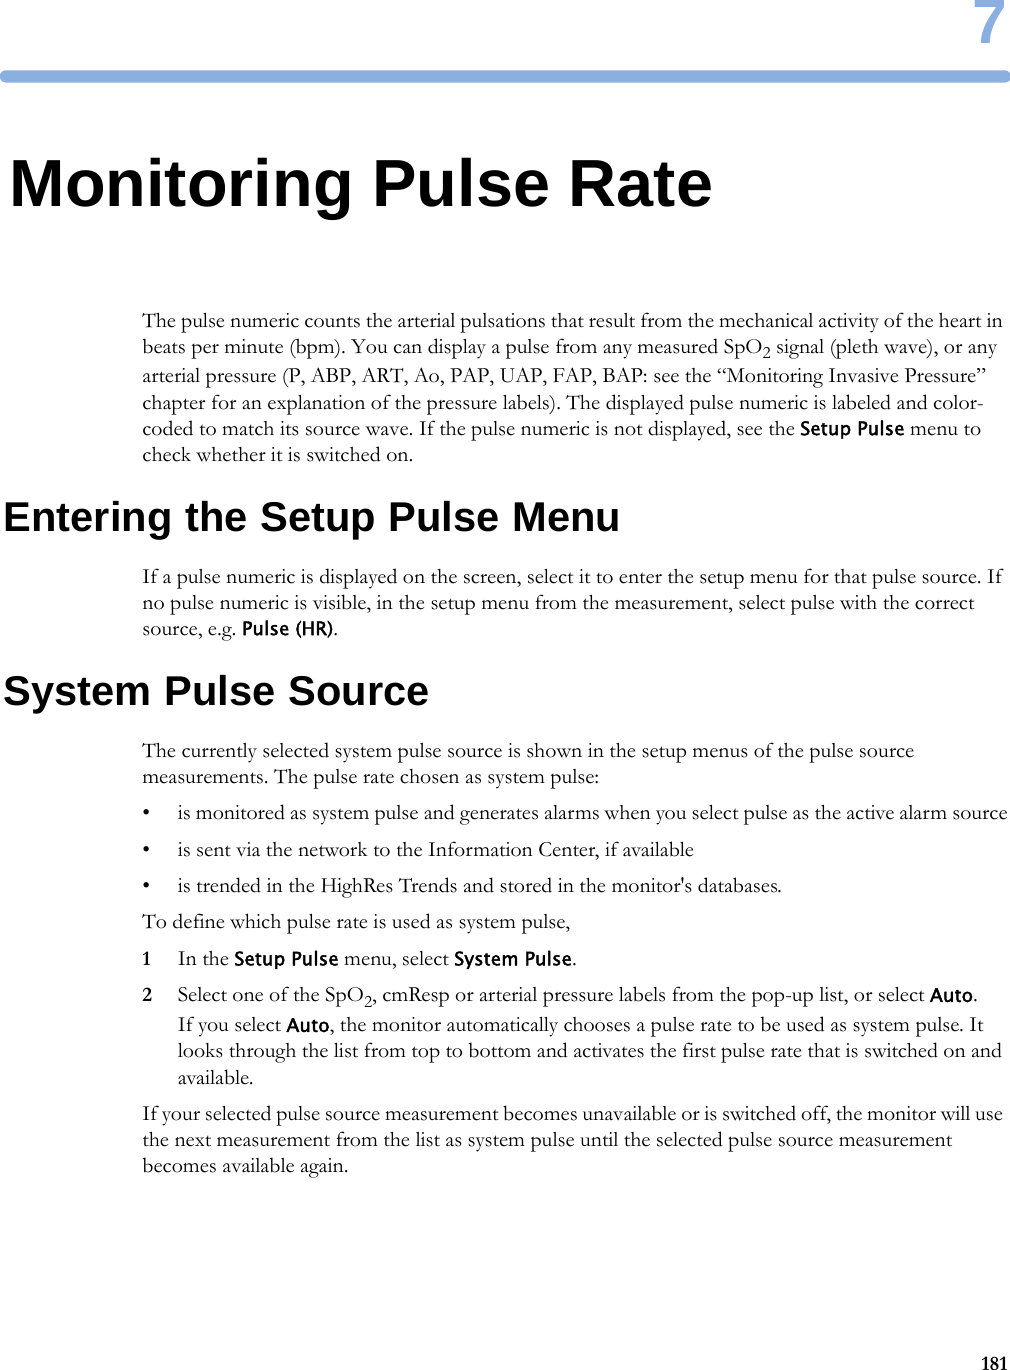 71817Monitoring Pulse RateThe pulse numeric counts the arterial pulsations that result from the mechanical activity of the heart in beats per minute (bpm). You can display a pulse from any measured SpO2 signal (pleth wave), or any arterial pressure (P, ABP, ART, Ao, PAP, UAP, FAP, BAP: see the “Monitoring Invasive Pressure” chapter for an explanation of the pressure labels). The displayed pulse numeric is labeled and color-coded to match its source wave. If the pulse numeric is not displayed, see the Setup Pulse menu to check whether it is switched on.Entering the Setup Pulse MenuIf a pulse numeric is displayed on the screen, select it to enter the setup menu for that pulse source. If no pulse numeric is visible, in the setup menu from the measurement, select pulse with the correct source, e.g. Pulse (HR).System Pulse SourceThe currently selected system pulse source is shown in the setup menus of the pulse source measurements. The pulse rate chosen as system pulse:• is monitored as system pulse and generates alarms when you select pulse as the active alarm source• is sent via the network to the Information Center, if available• is trended in the HighRes Trends and stored in the monitor&apos;s databases.To define which pulse rate is used as system pulse,1In the Setup Pulse menu, select System Pulse.2Select one of the SpO2, cmResp or arterial pressure labels from the pop-up list, or select Auto.If you select Auto, the monitor automatically chooses a pulse rate to be used as system pulse. It looks through the list from top to bottom and activates the first pulse rate that is switched on and available.If your selected pulse source measurement becomes unavailable or is switched off, the monitor will use the next measurement from the list as system pulse until the selected pulse source measurement becomes available again.